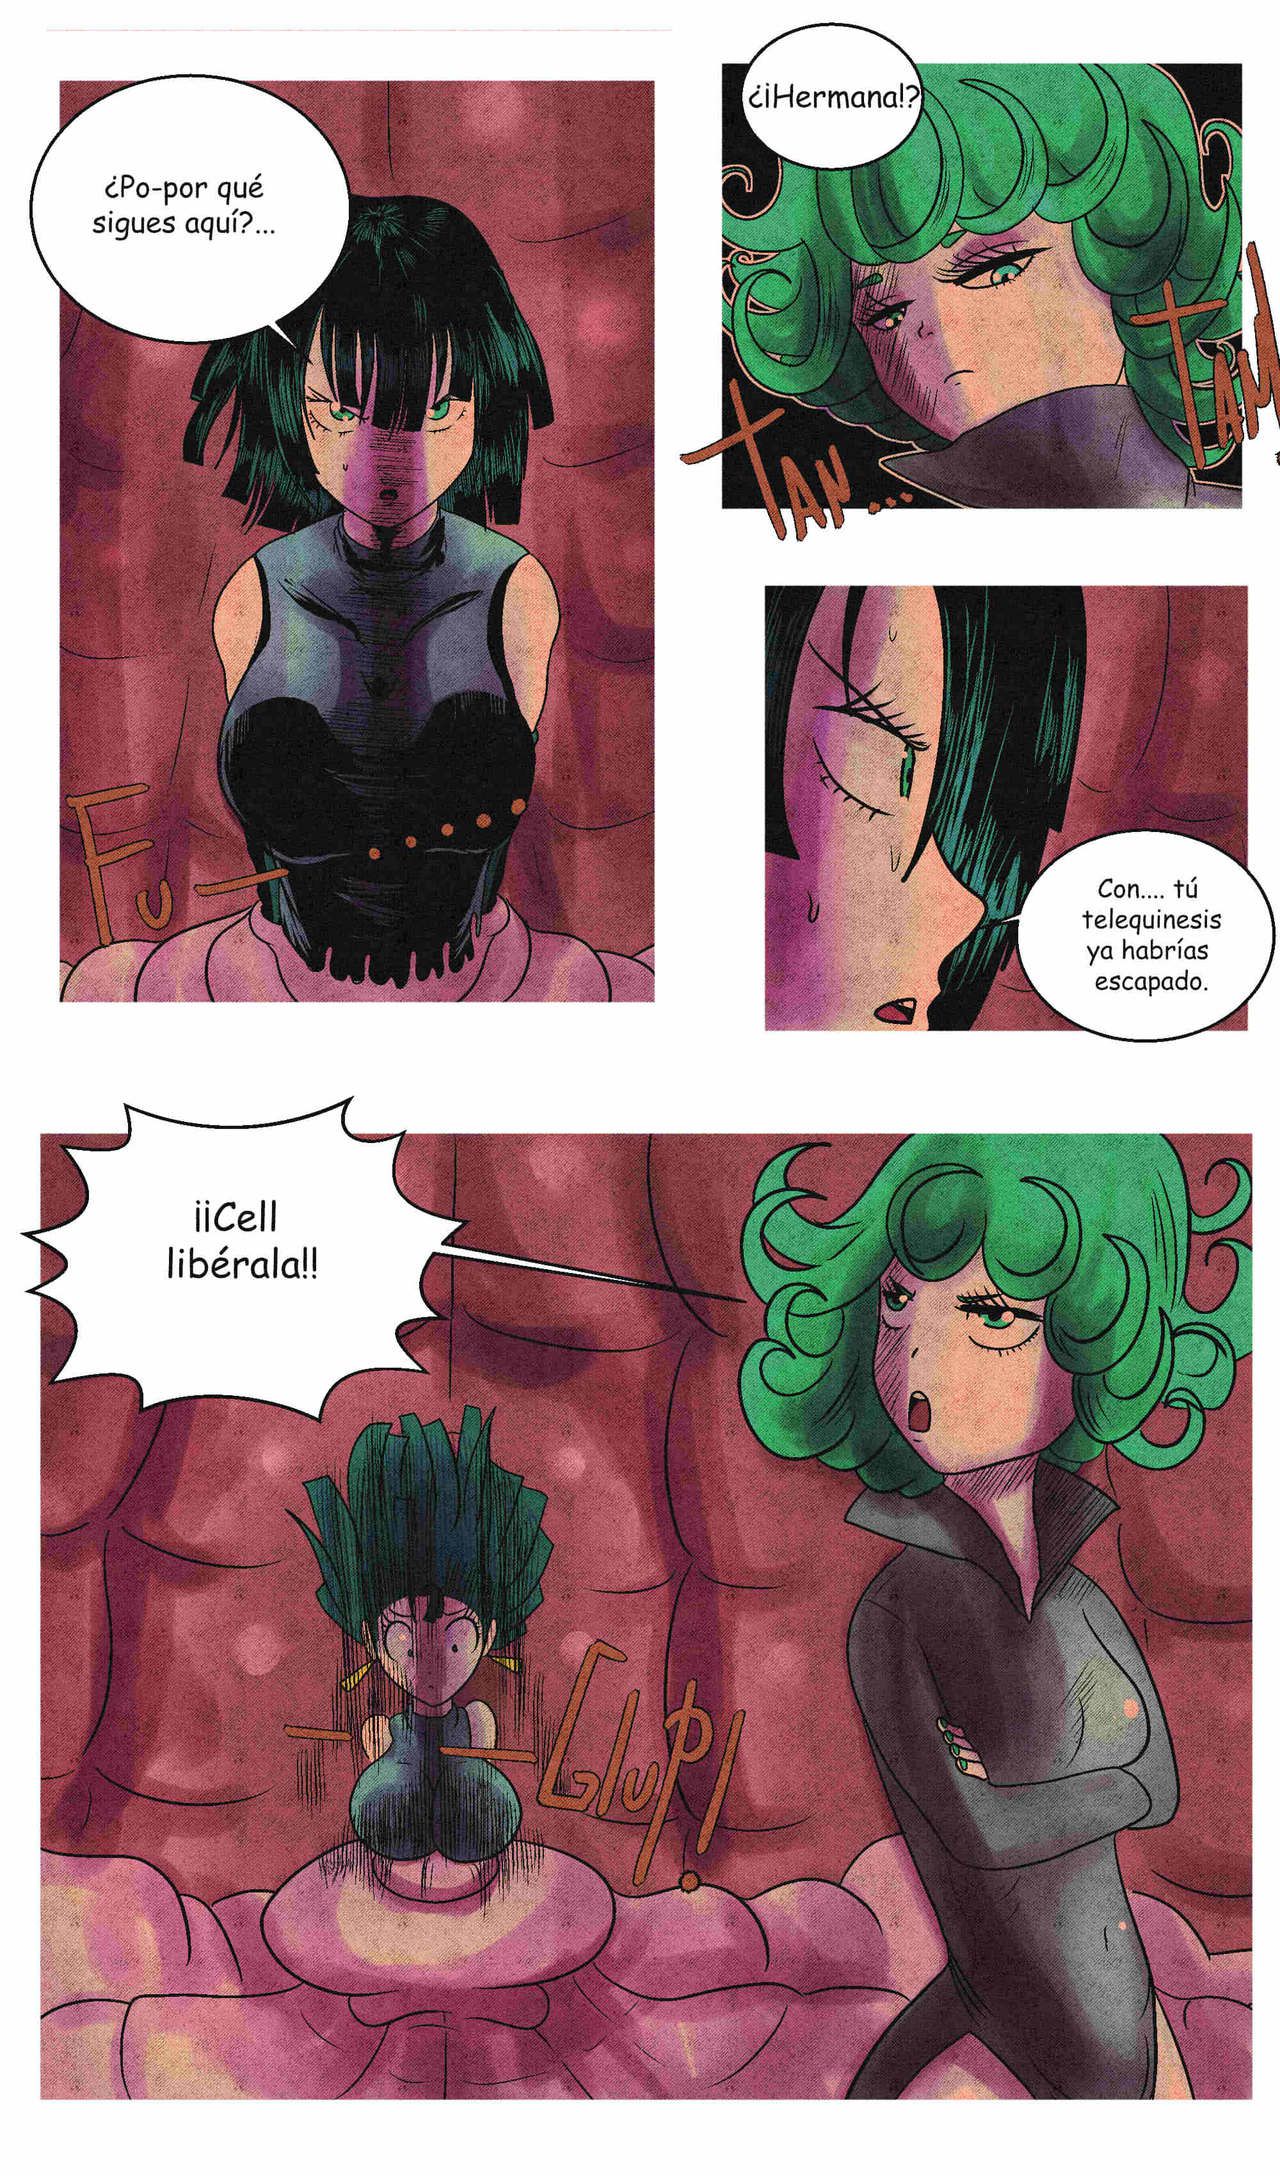 [CellVore] Cell Absorbs Psychic Sisters [Spanish] 23